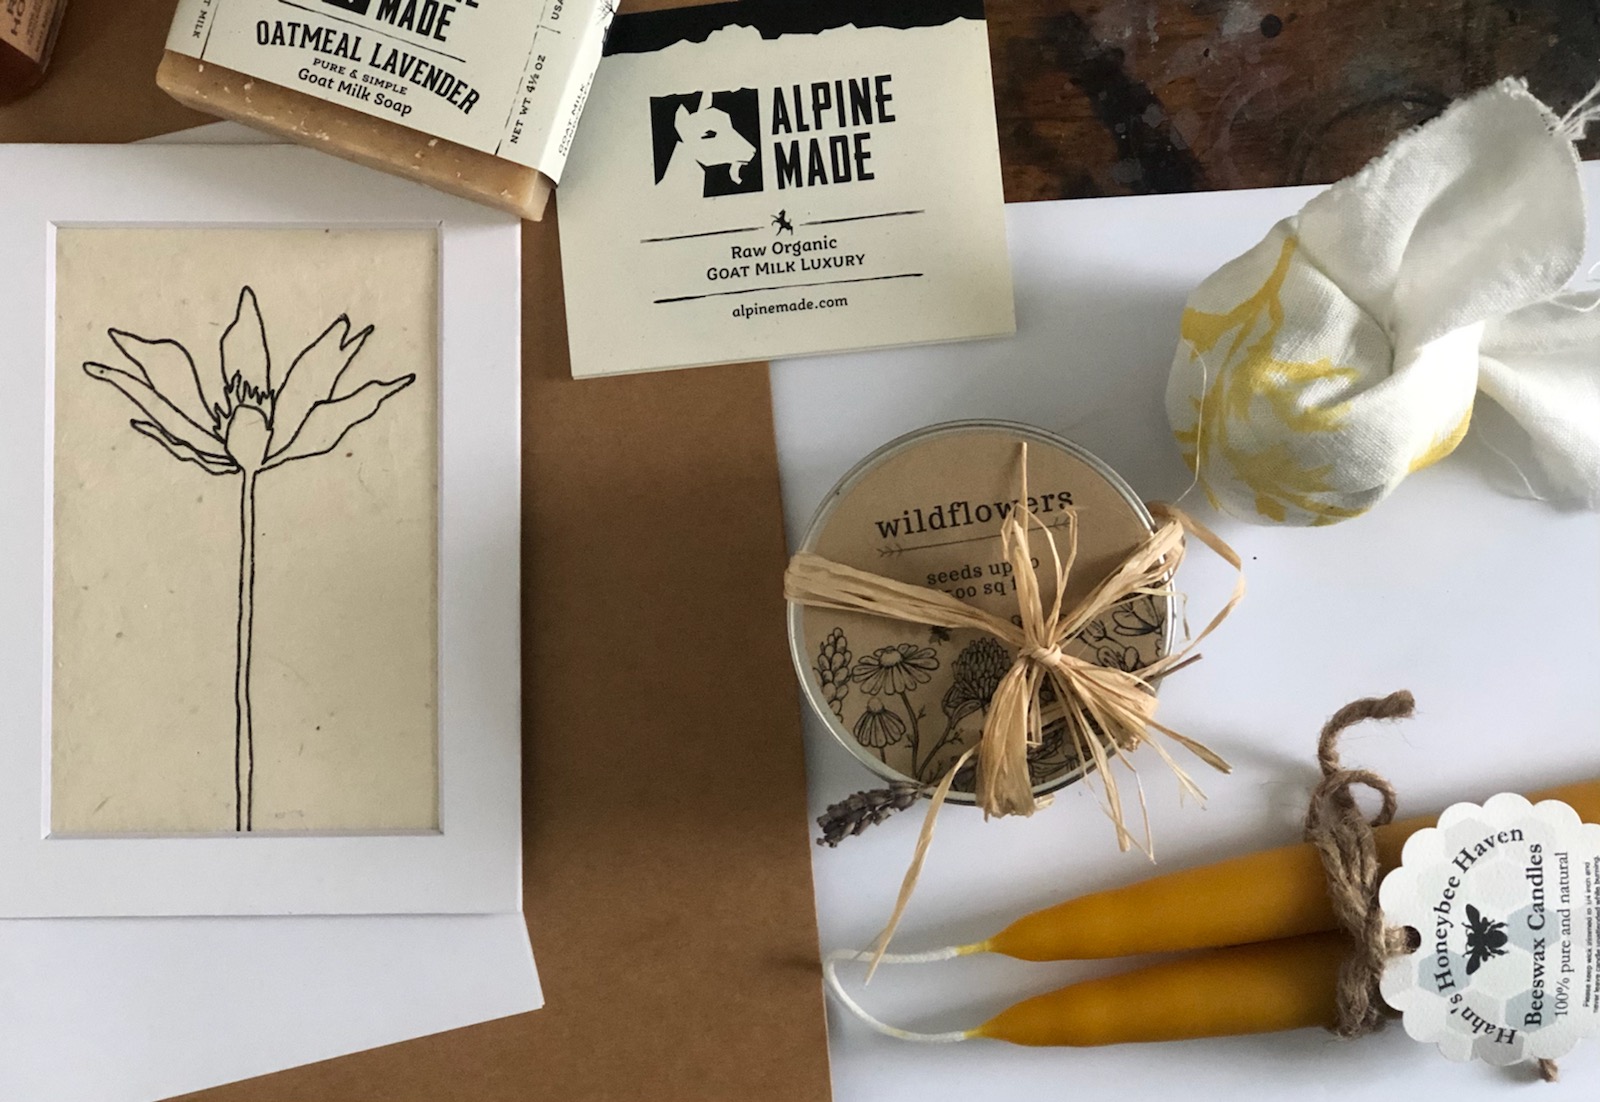 storybook farm — Four Different Goat's Milk Soaps 38% local